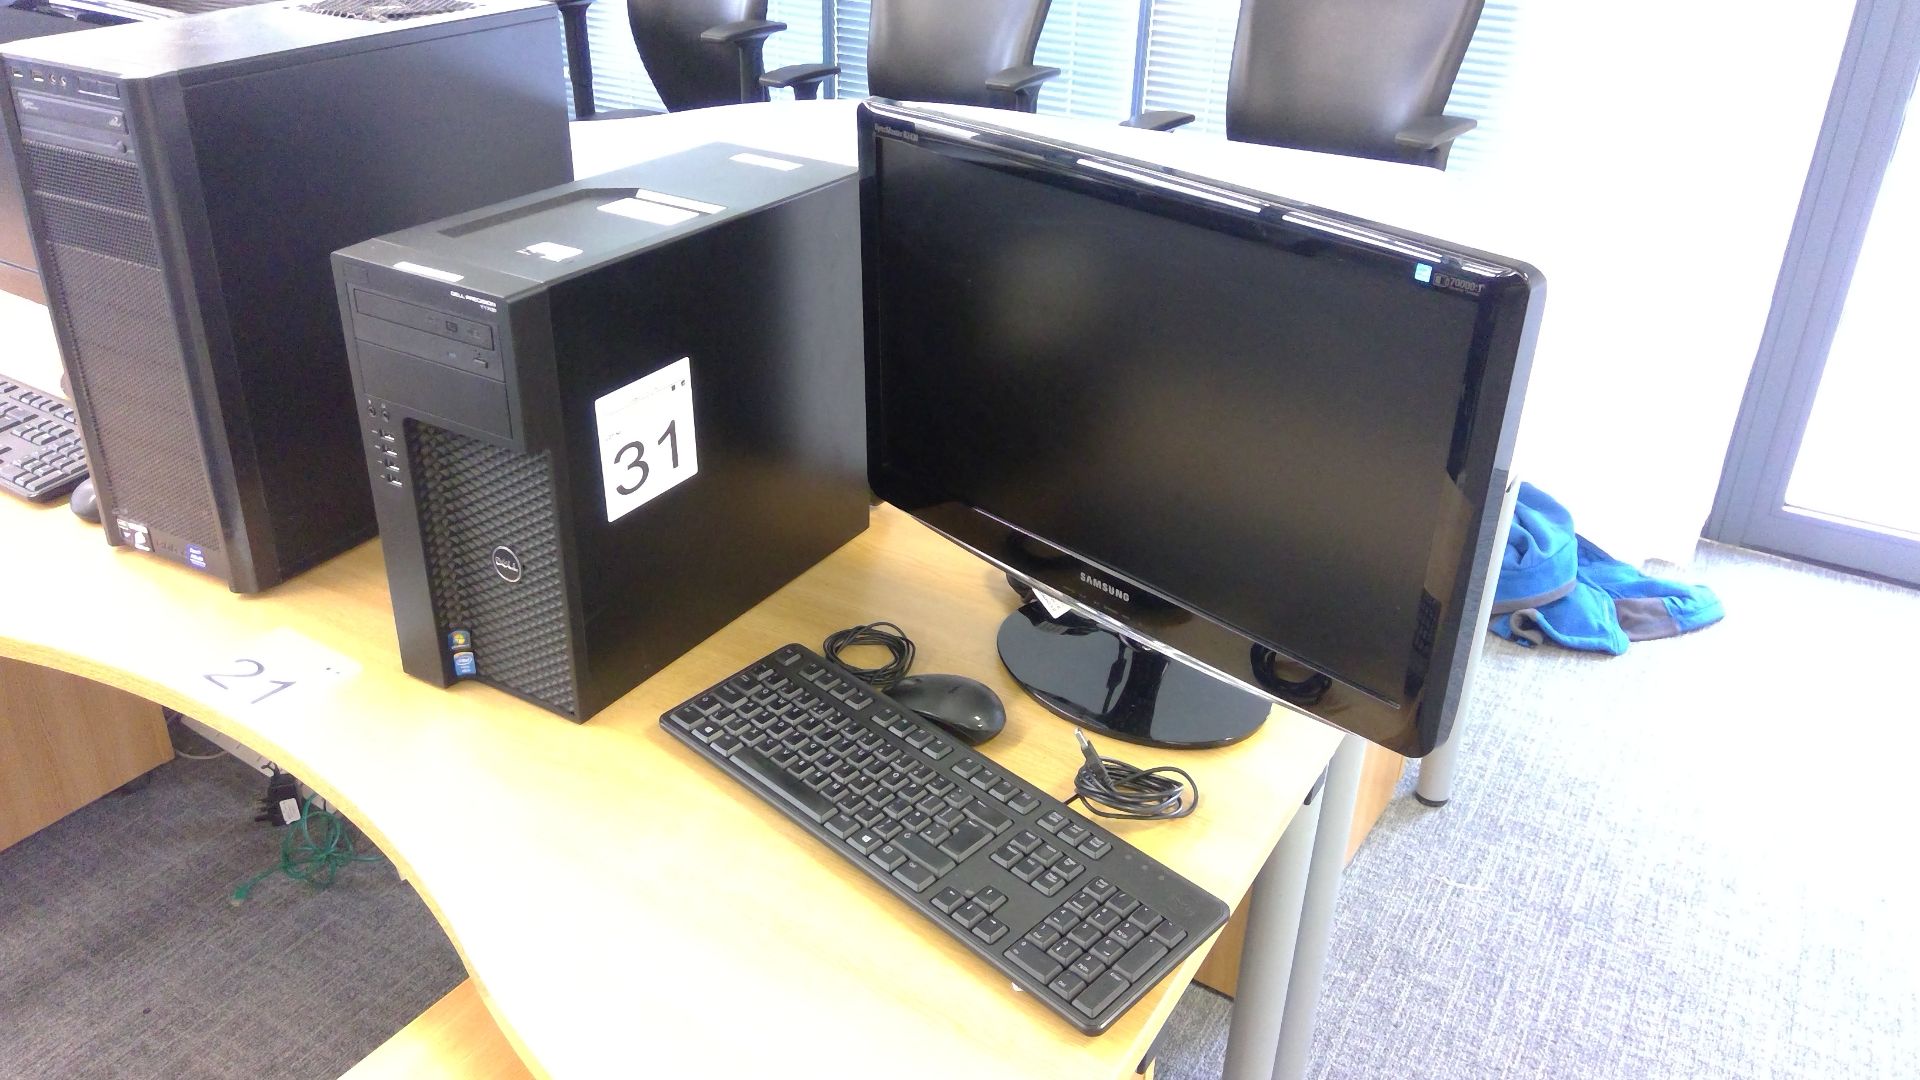 Dell Precision T1700 Intel Xeon PC complete with Samsung 24 inch monitor, keyboard and mouse